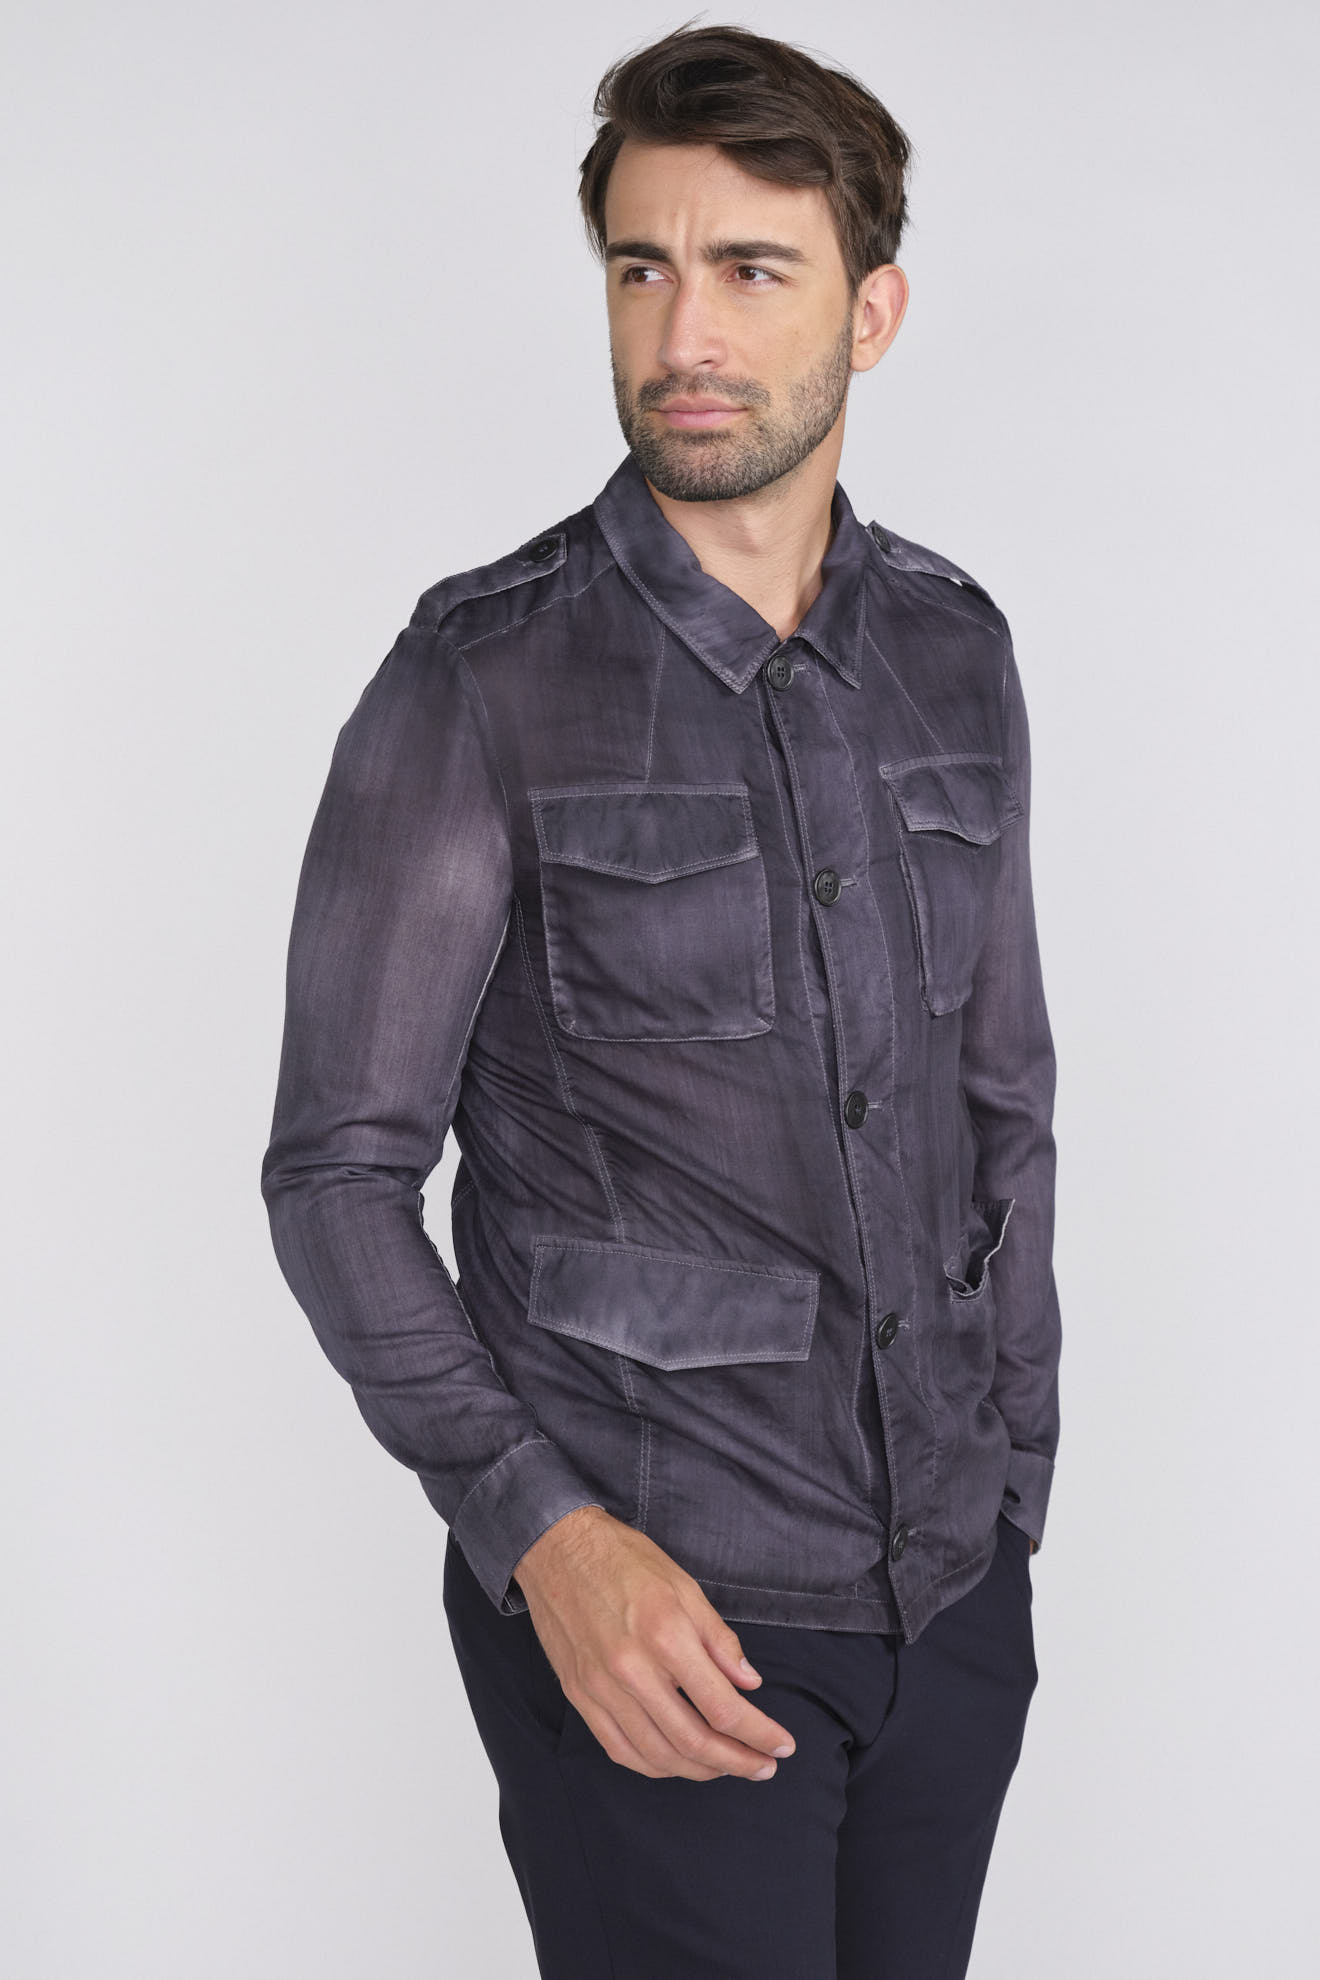 GMS 75 Shirt in denim look with full-length button placket blue 50